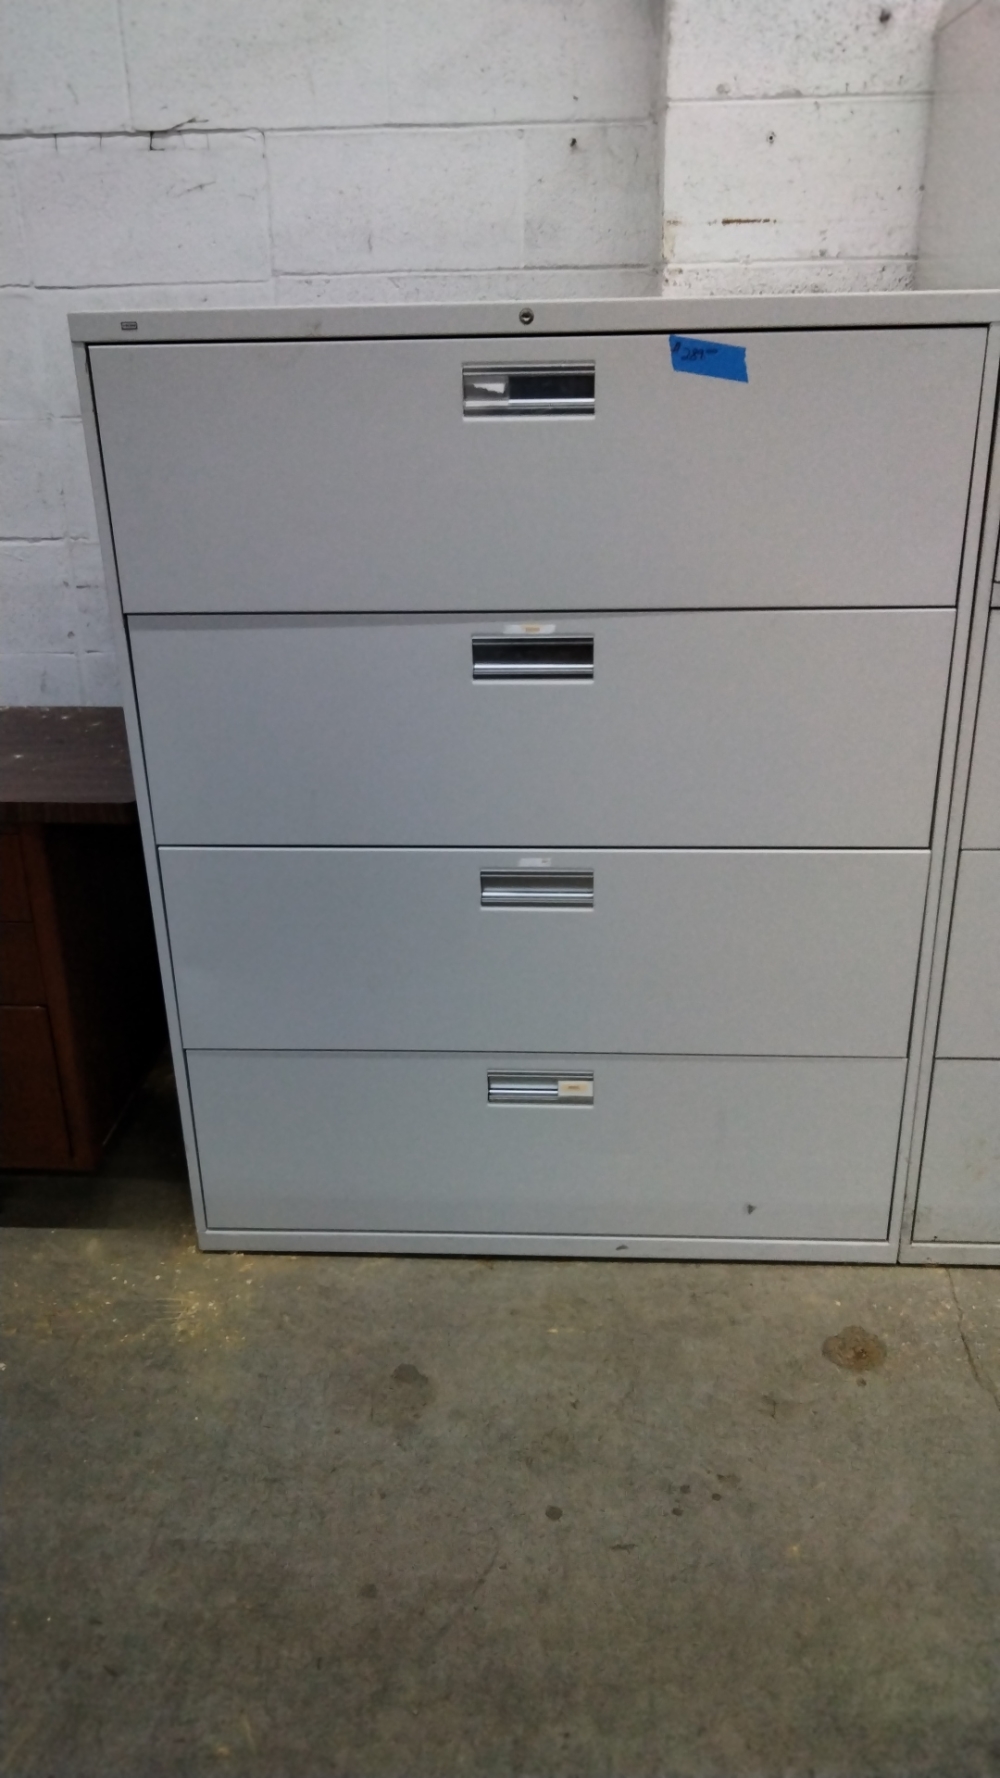  4 drawer Lateral filing cabinet